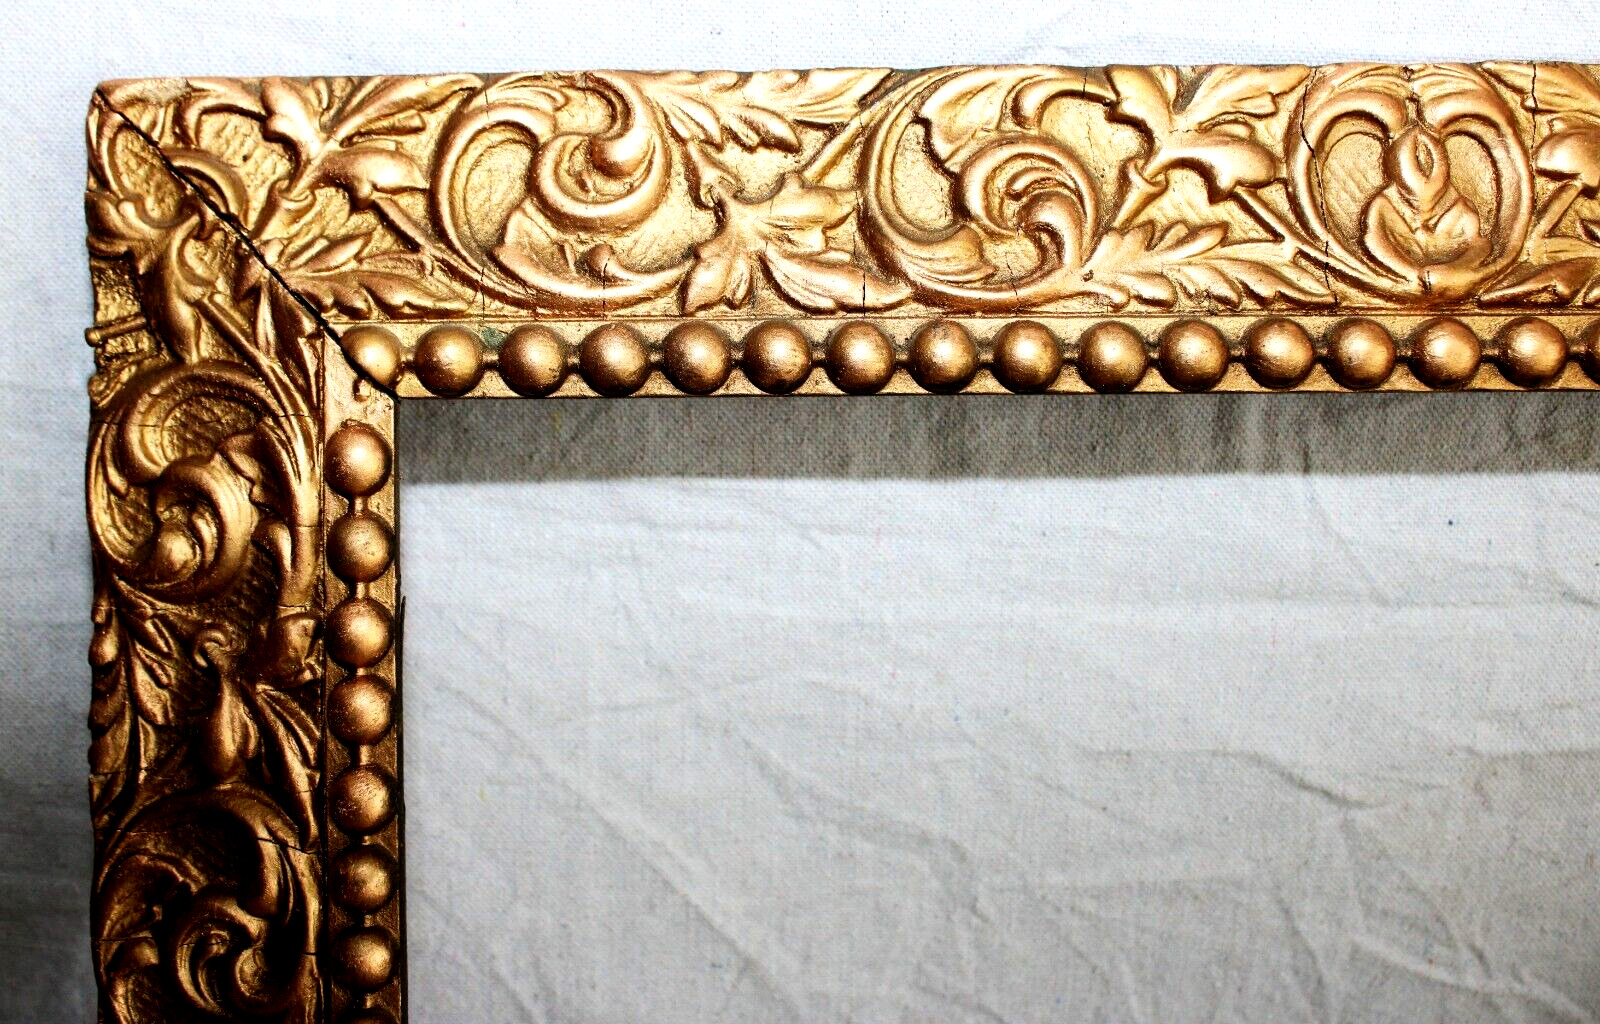 ANTIQUE FITS 12X 15 GOLD GILT PICTURE FRAME VICTORIAN WOOD ORNATE GESSO WIDE